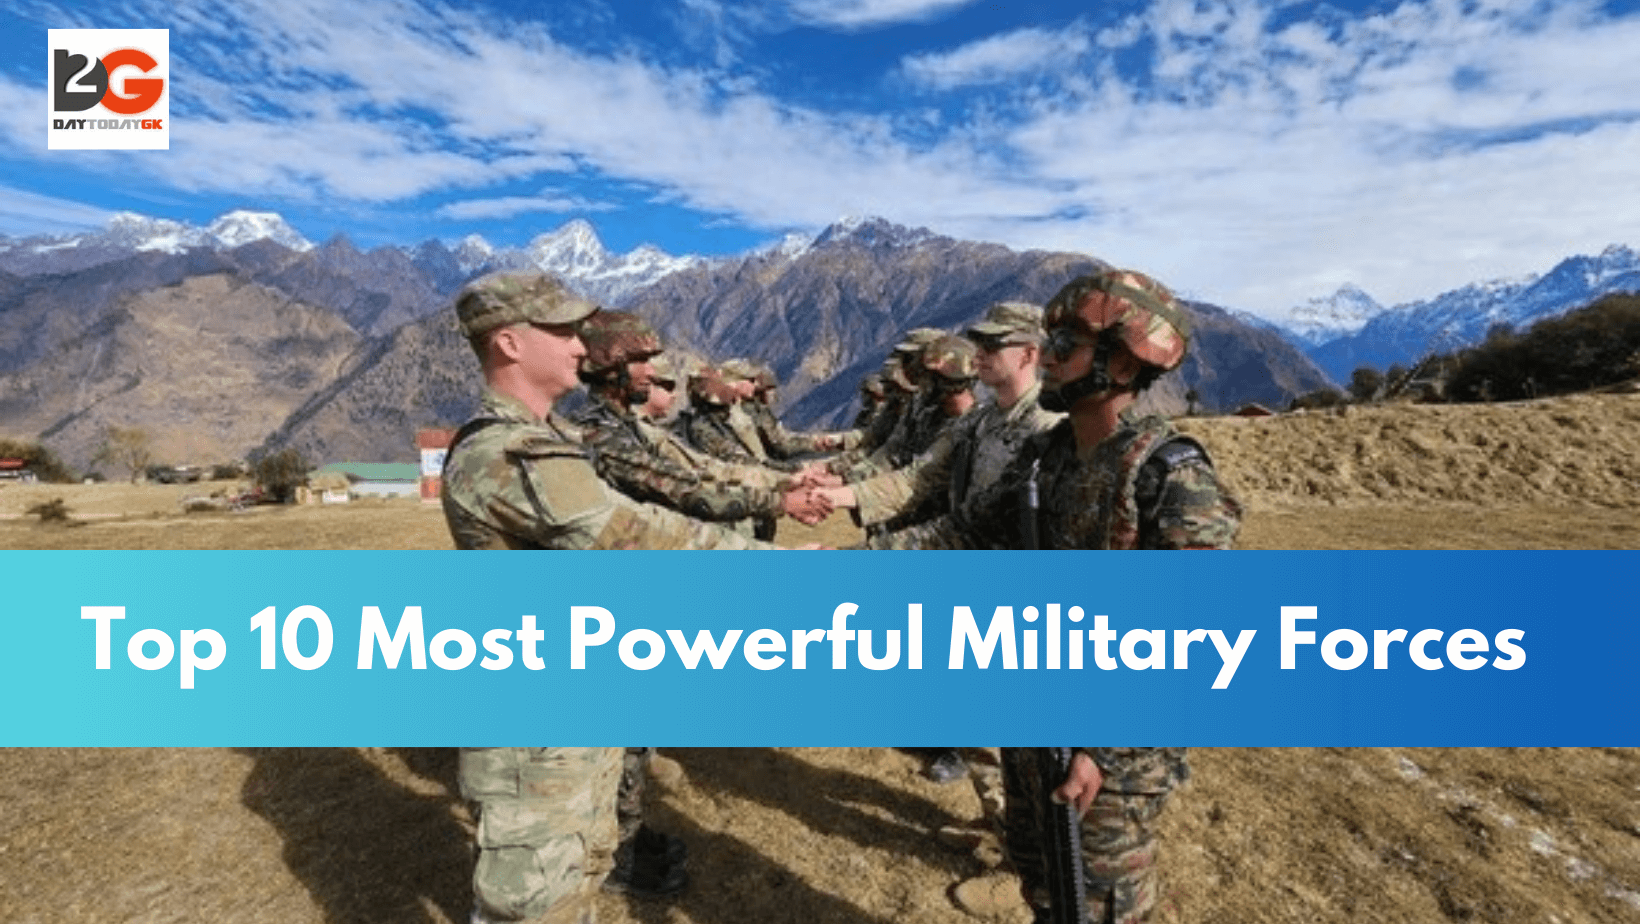 Top 10 Most Powerful Military Forces in the World